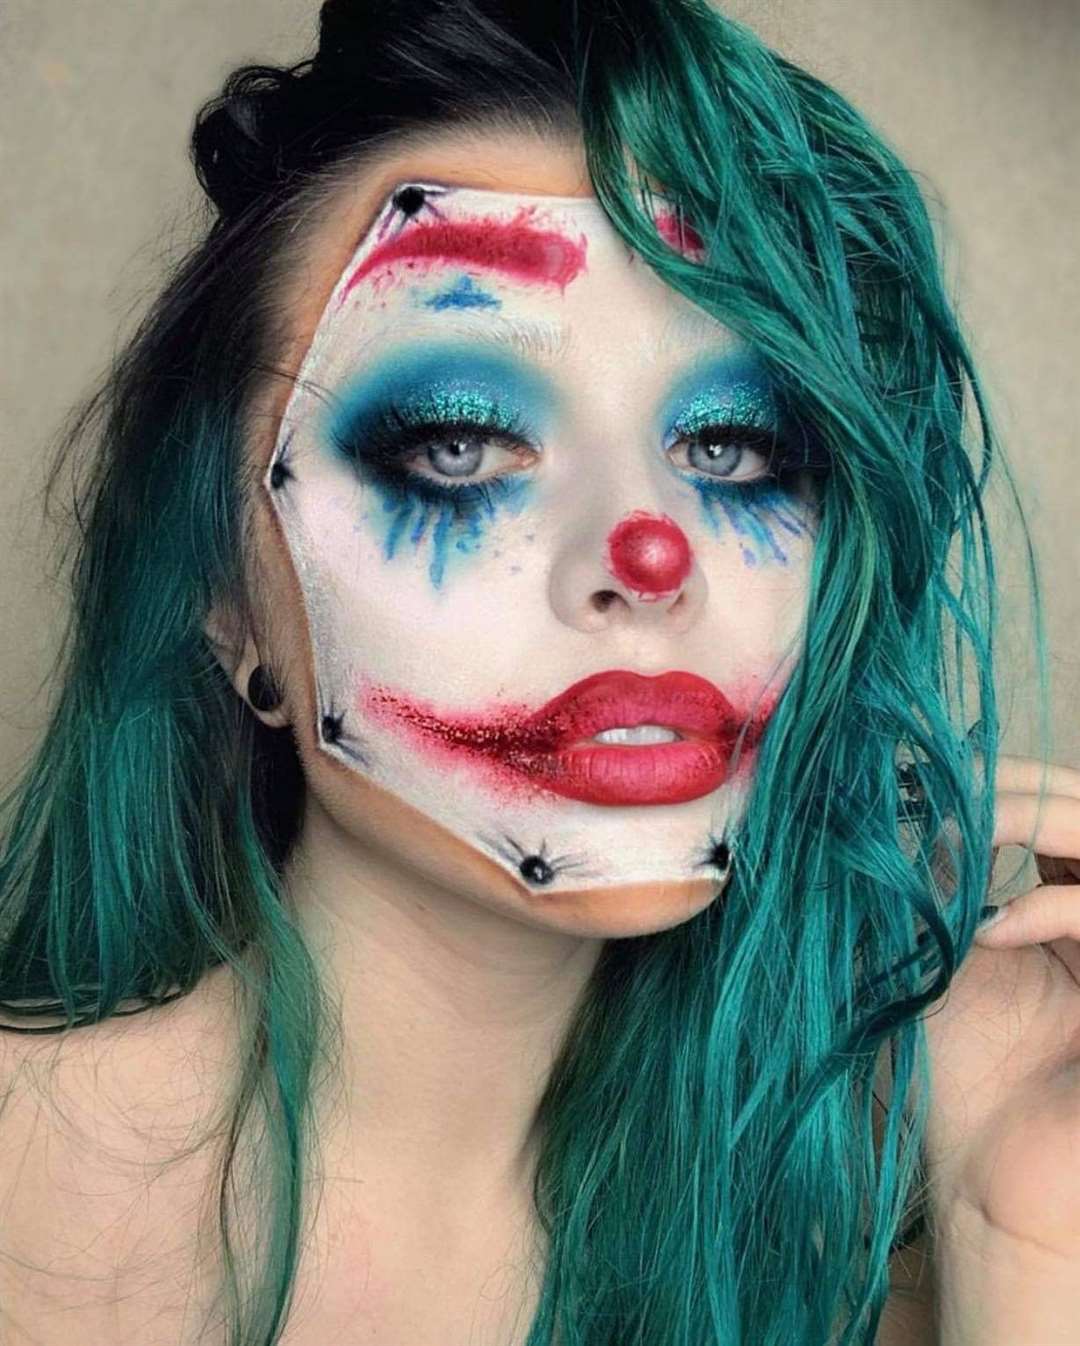 Sarah Mulder with a glam version of the Joker's make-up.